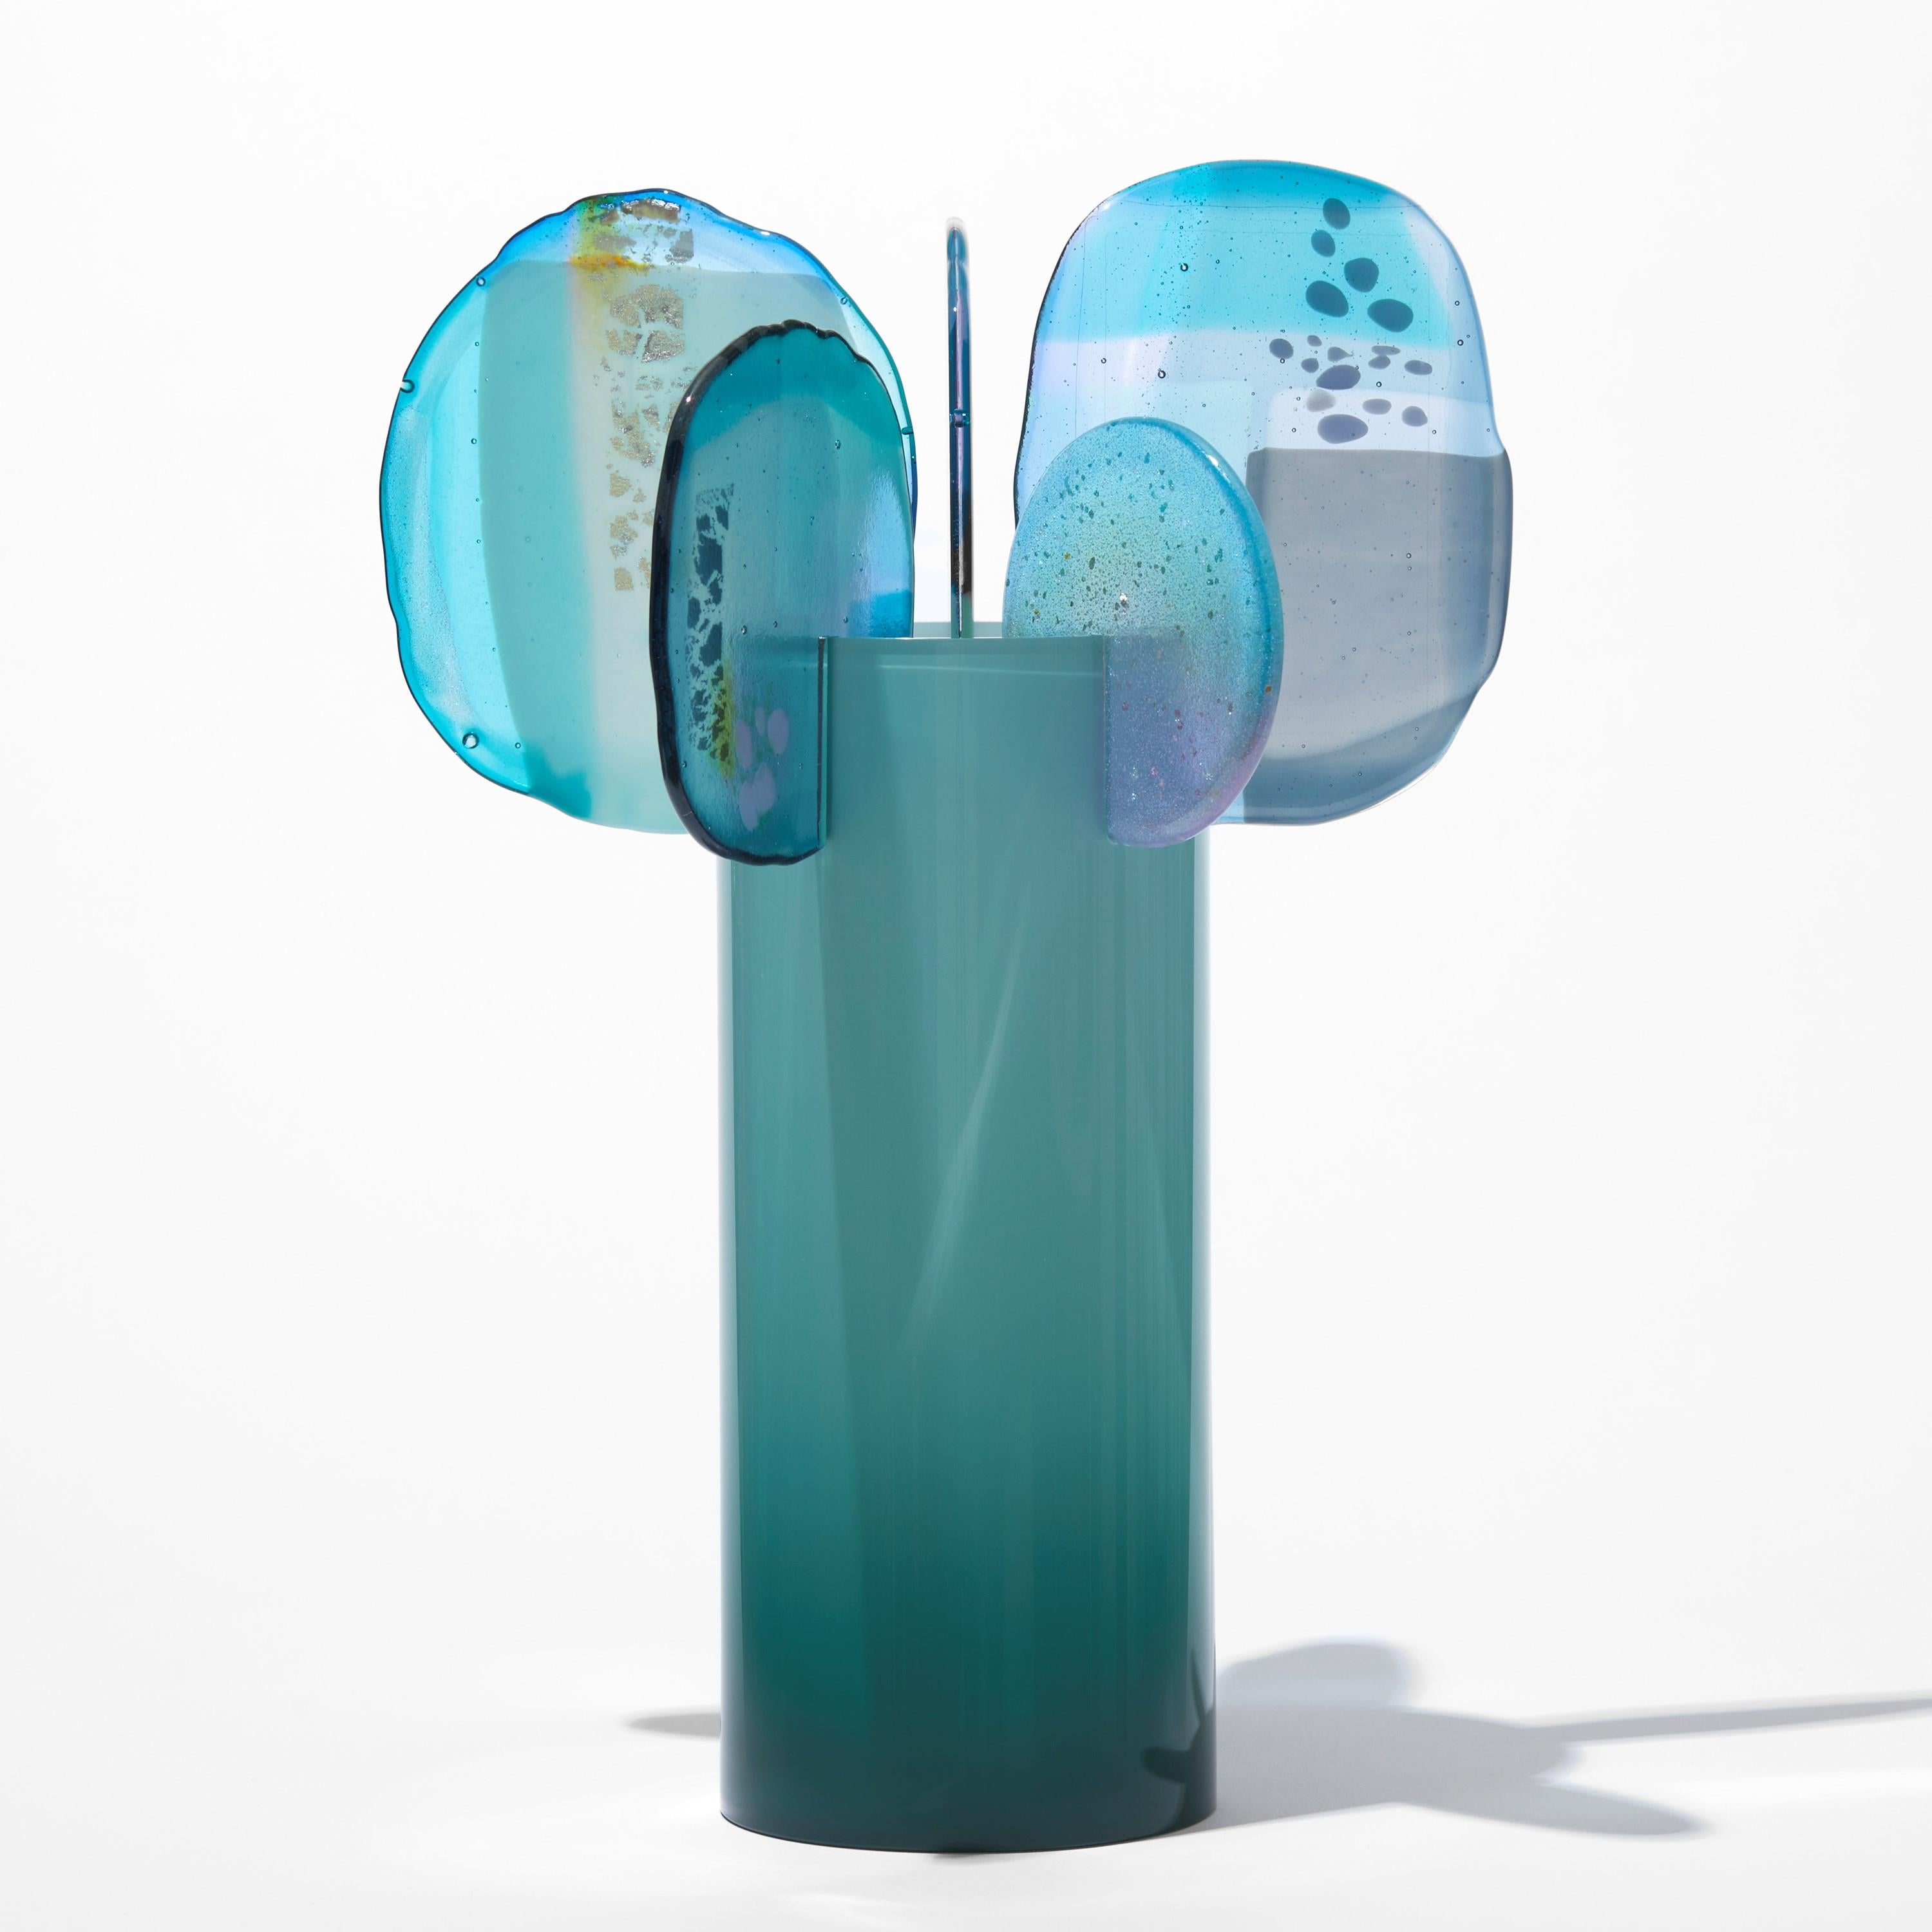 'Paradise 08 in Jadeite' is a unique glass sculpture created using hybrid hand-made glass techniques by the British artist Amy Cushing. Combining mouth blown glass with kiln formed glass, each piece within the collection displays a multiple of